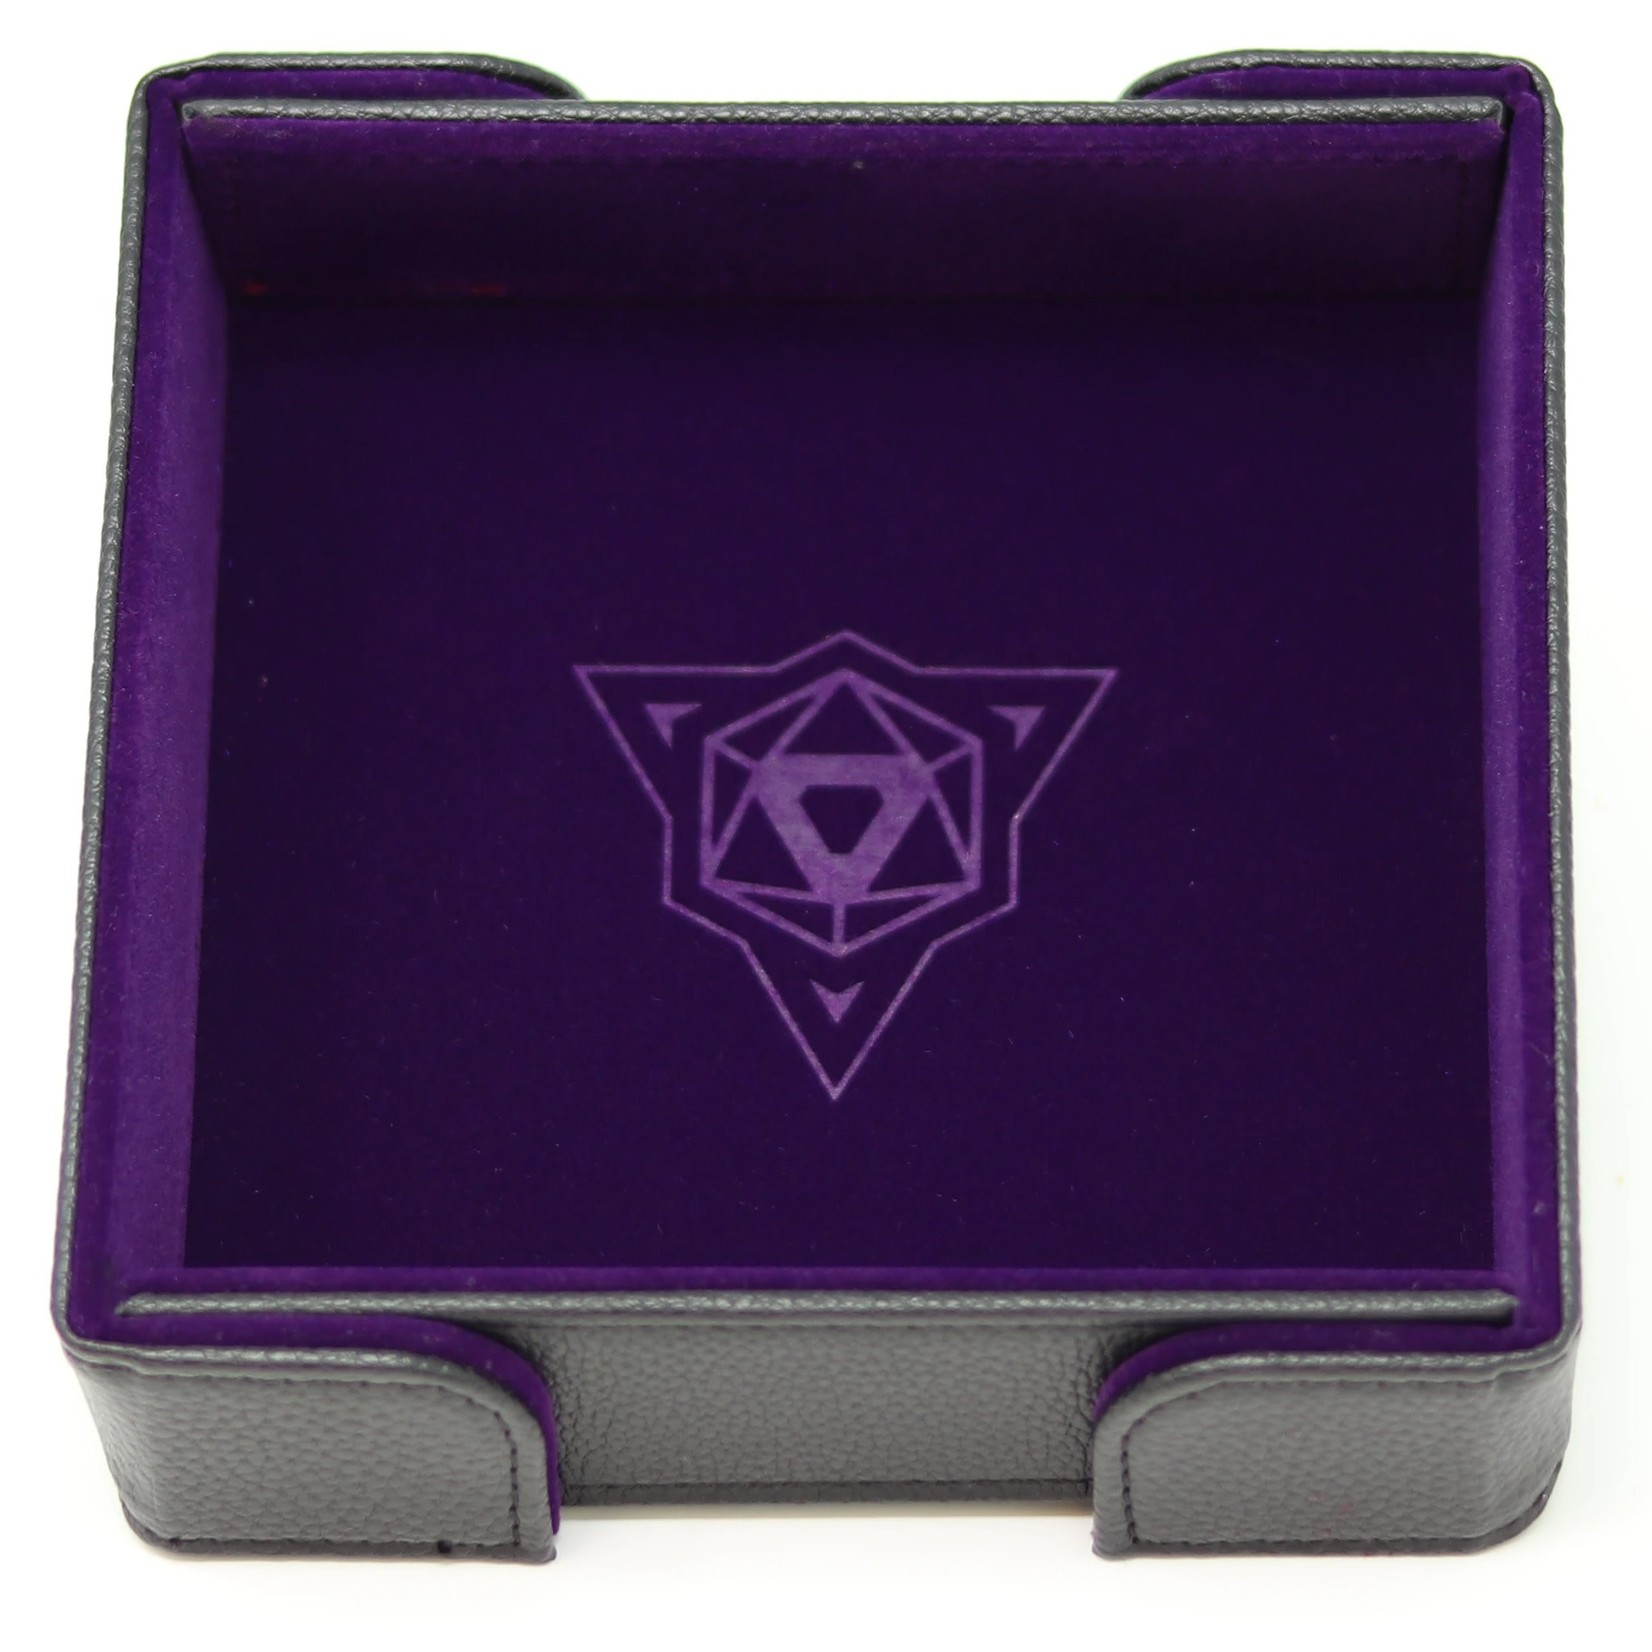 Die Hard Dice Dice Tray: Square, Purple (Magnetic)